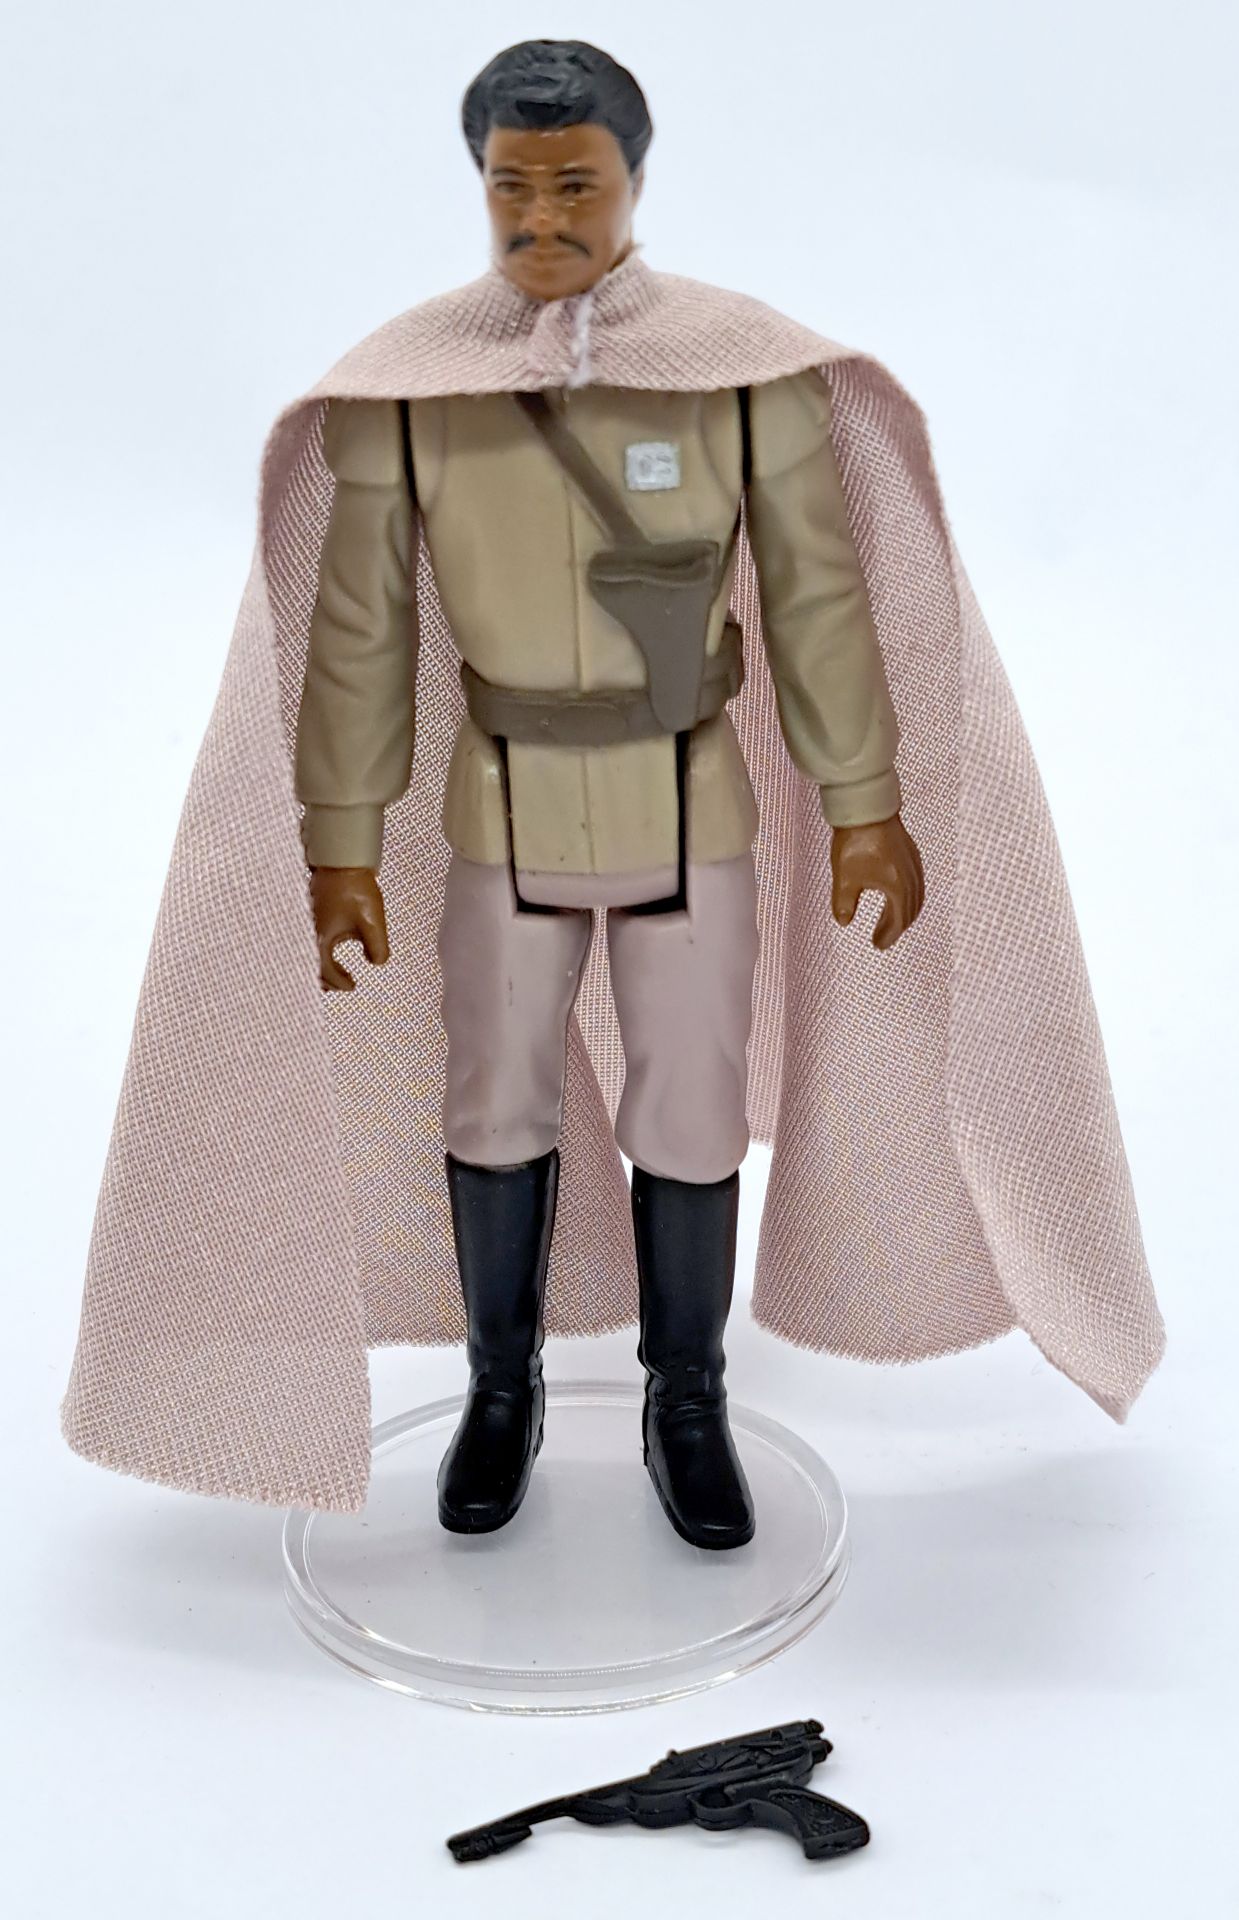 Kenner Star Wars Lando Calrissian General Pilot Last 17 with blaster. Condition is mint.